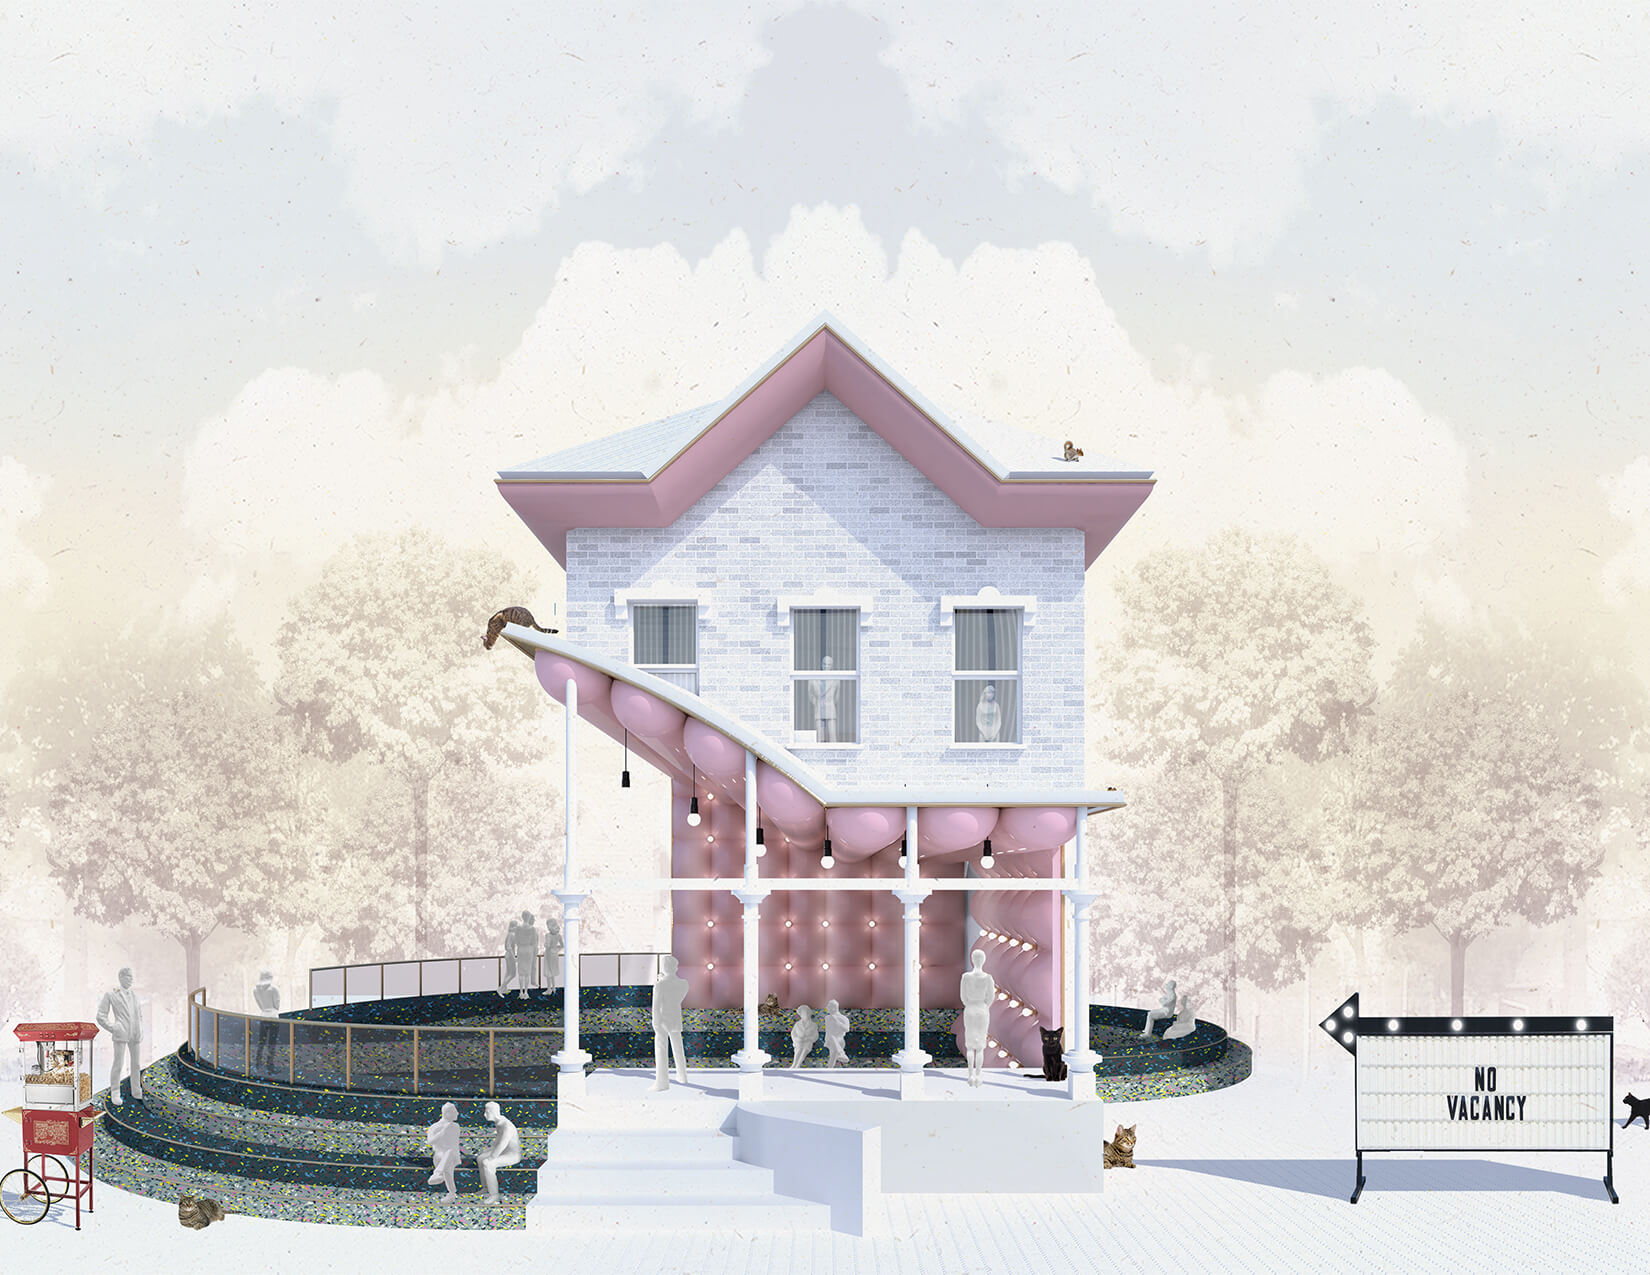 architectural rendering depicting a conceptual alteration of a historic Detroit house